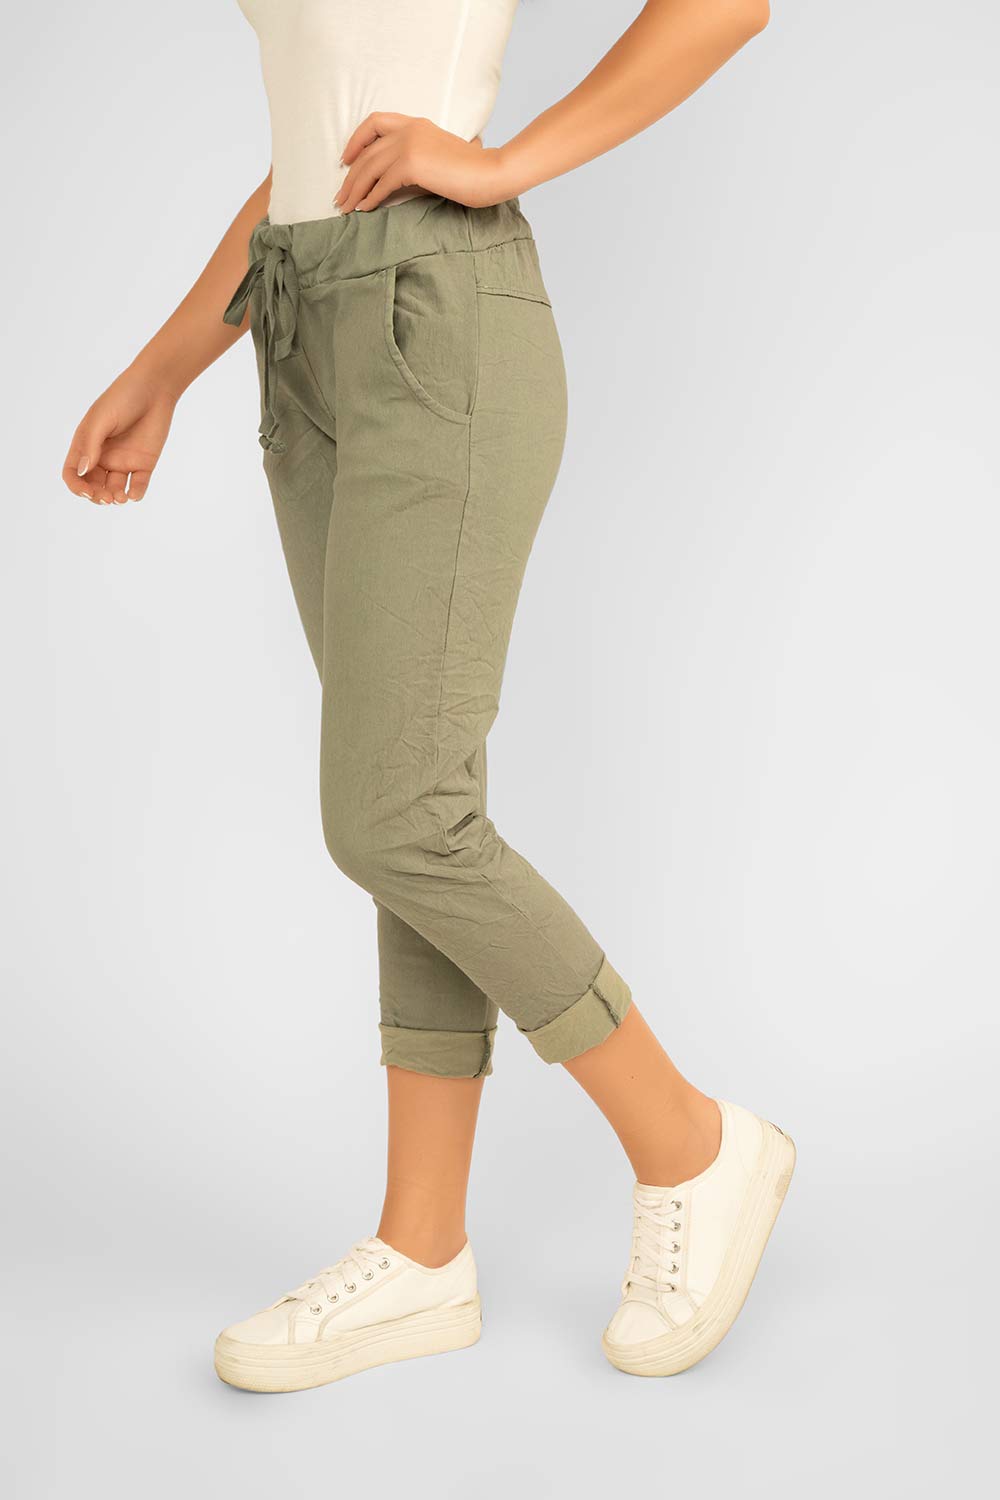 Women's Clothing BELLA AMORE (20002S) Pull-on Pants in ARMY